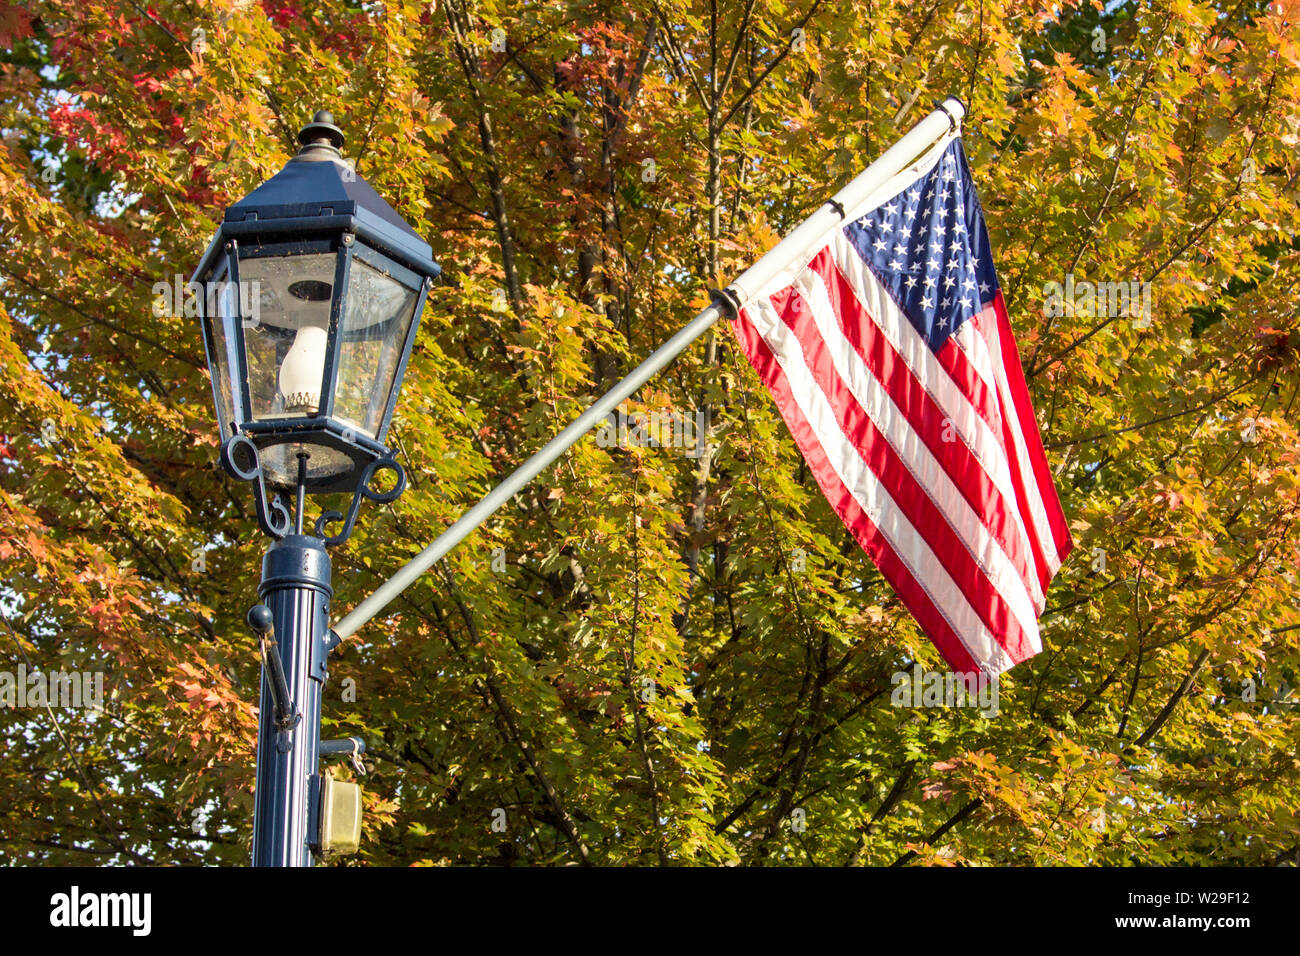 Small Town USA. Main Street lamppost and American flag set against beautiful fall foliage in the Midwest region of America. Stock Photo